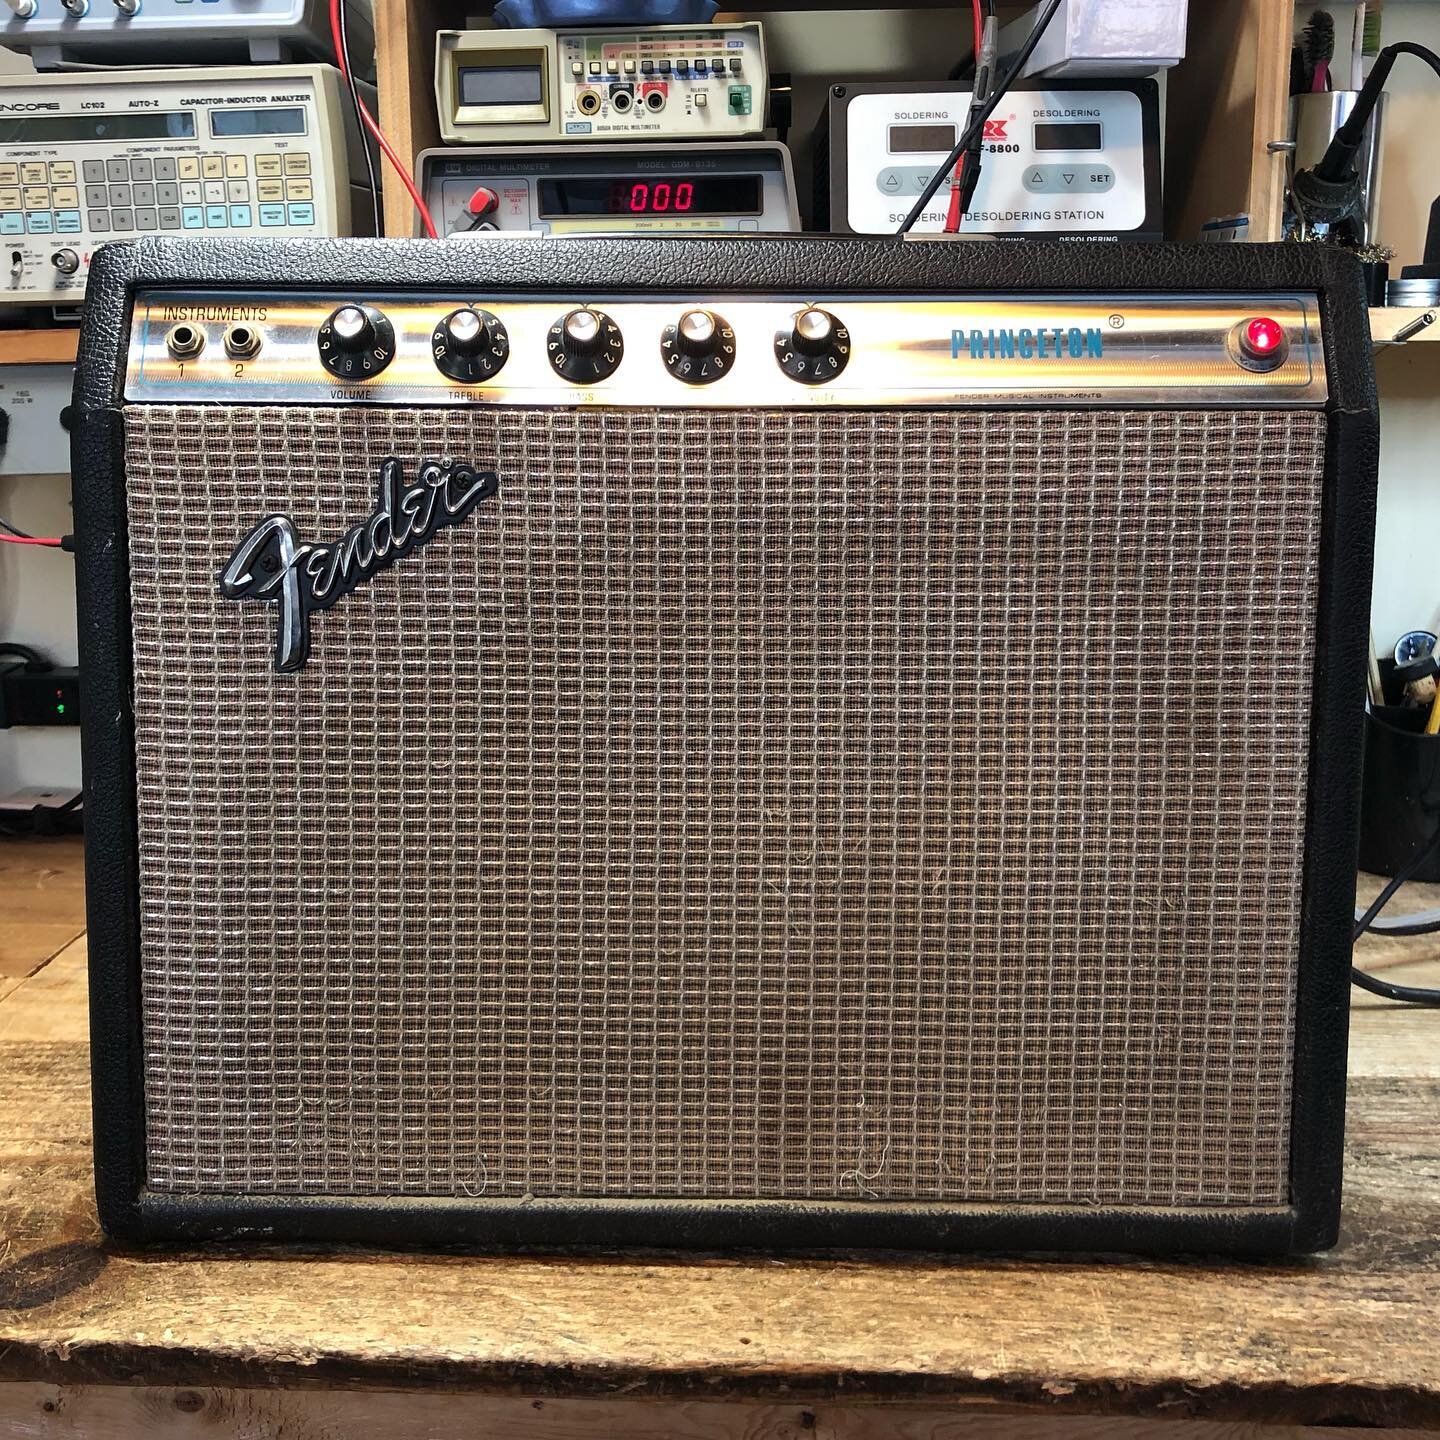 A fantastic 1974 Princeton. One owner! Just had an overhaul and sounds amazing. #bigcrunch #baltimore #amprepair #tubeamp #vintageamps #fender